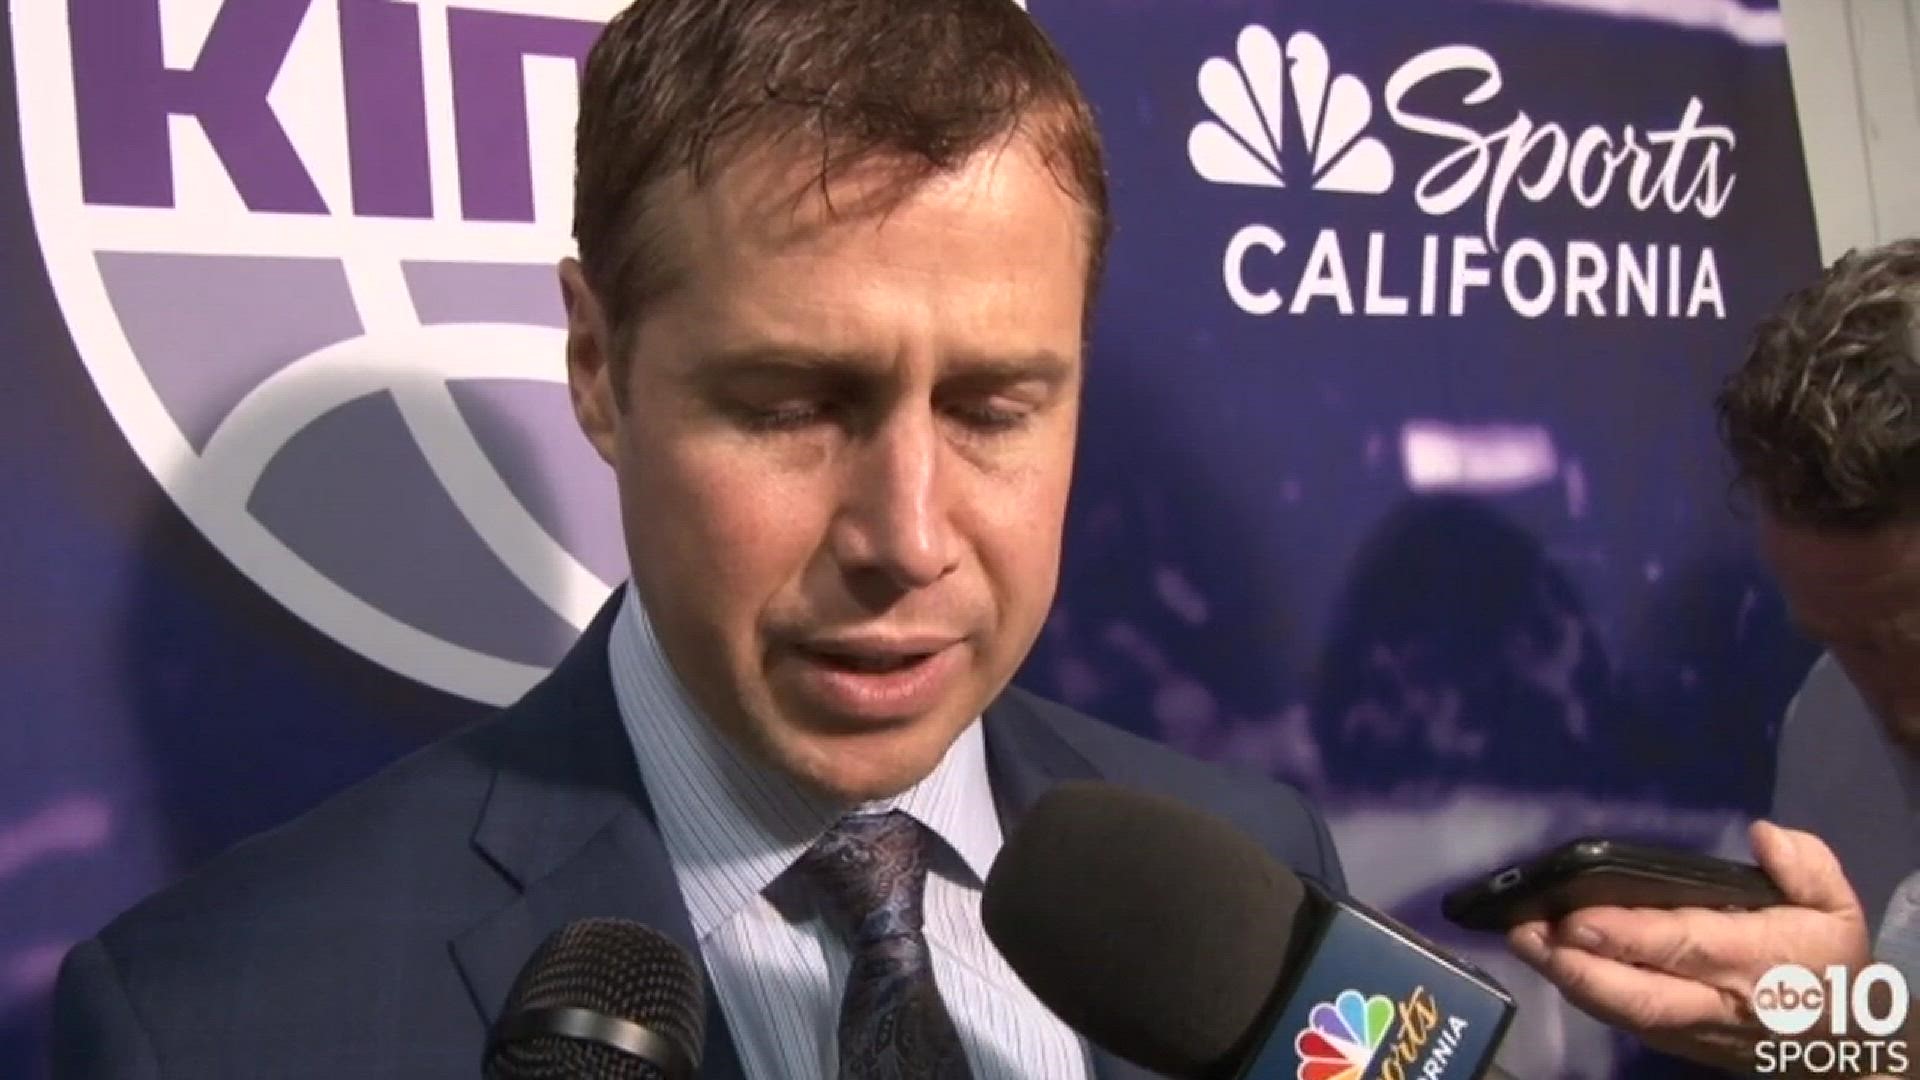 Kings head coach Dave Joerger talks about his team pulling off a victory in Oakland over the Golden State Warriors, on Friday for the second time this season at Oracle Arena.